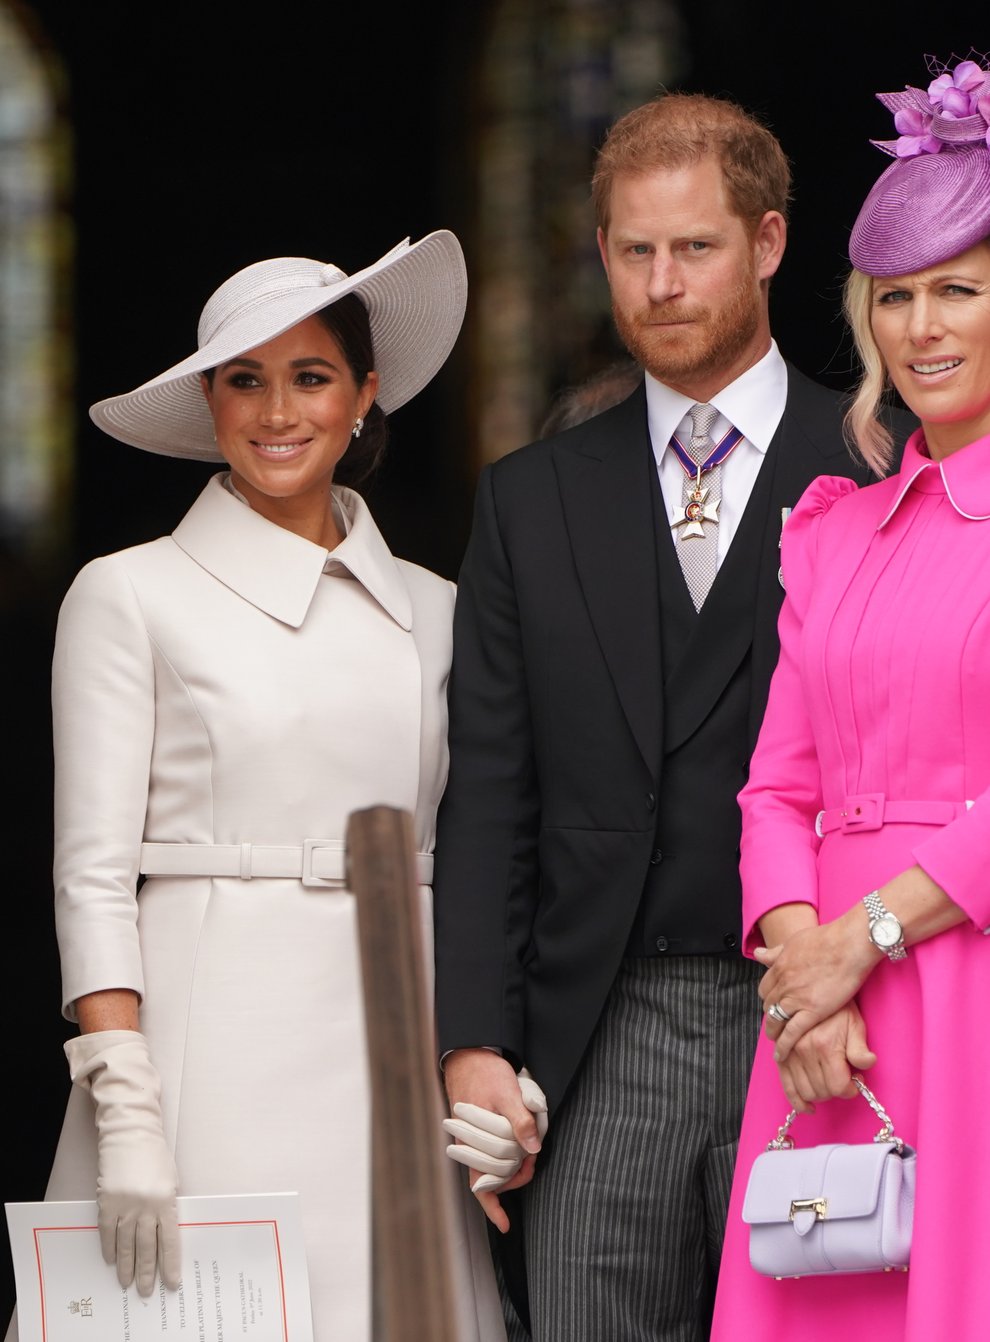 Peter Phillips, the Duchess of Sussex, the Duke of Sussex and Zara Tindall after the service (PA)